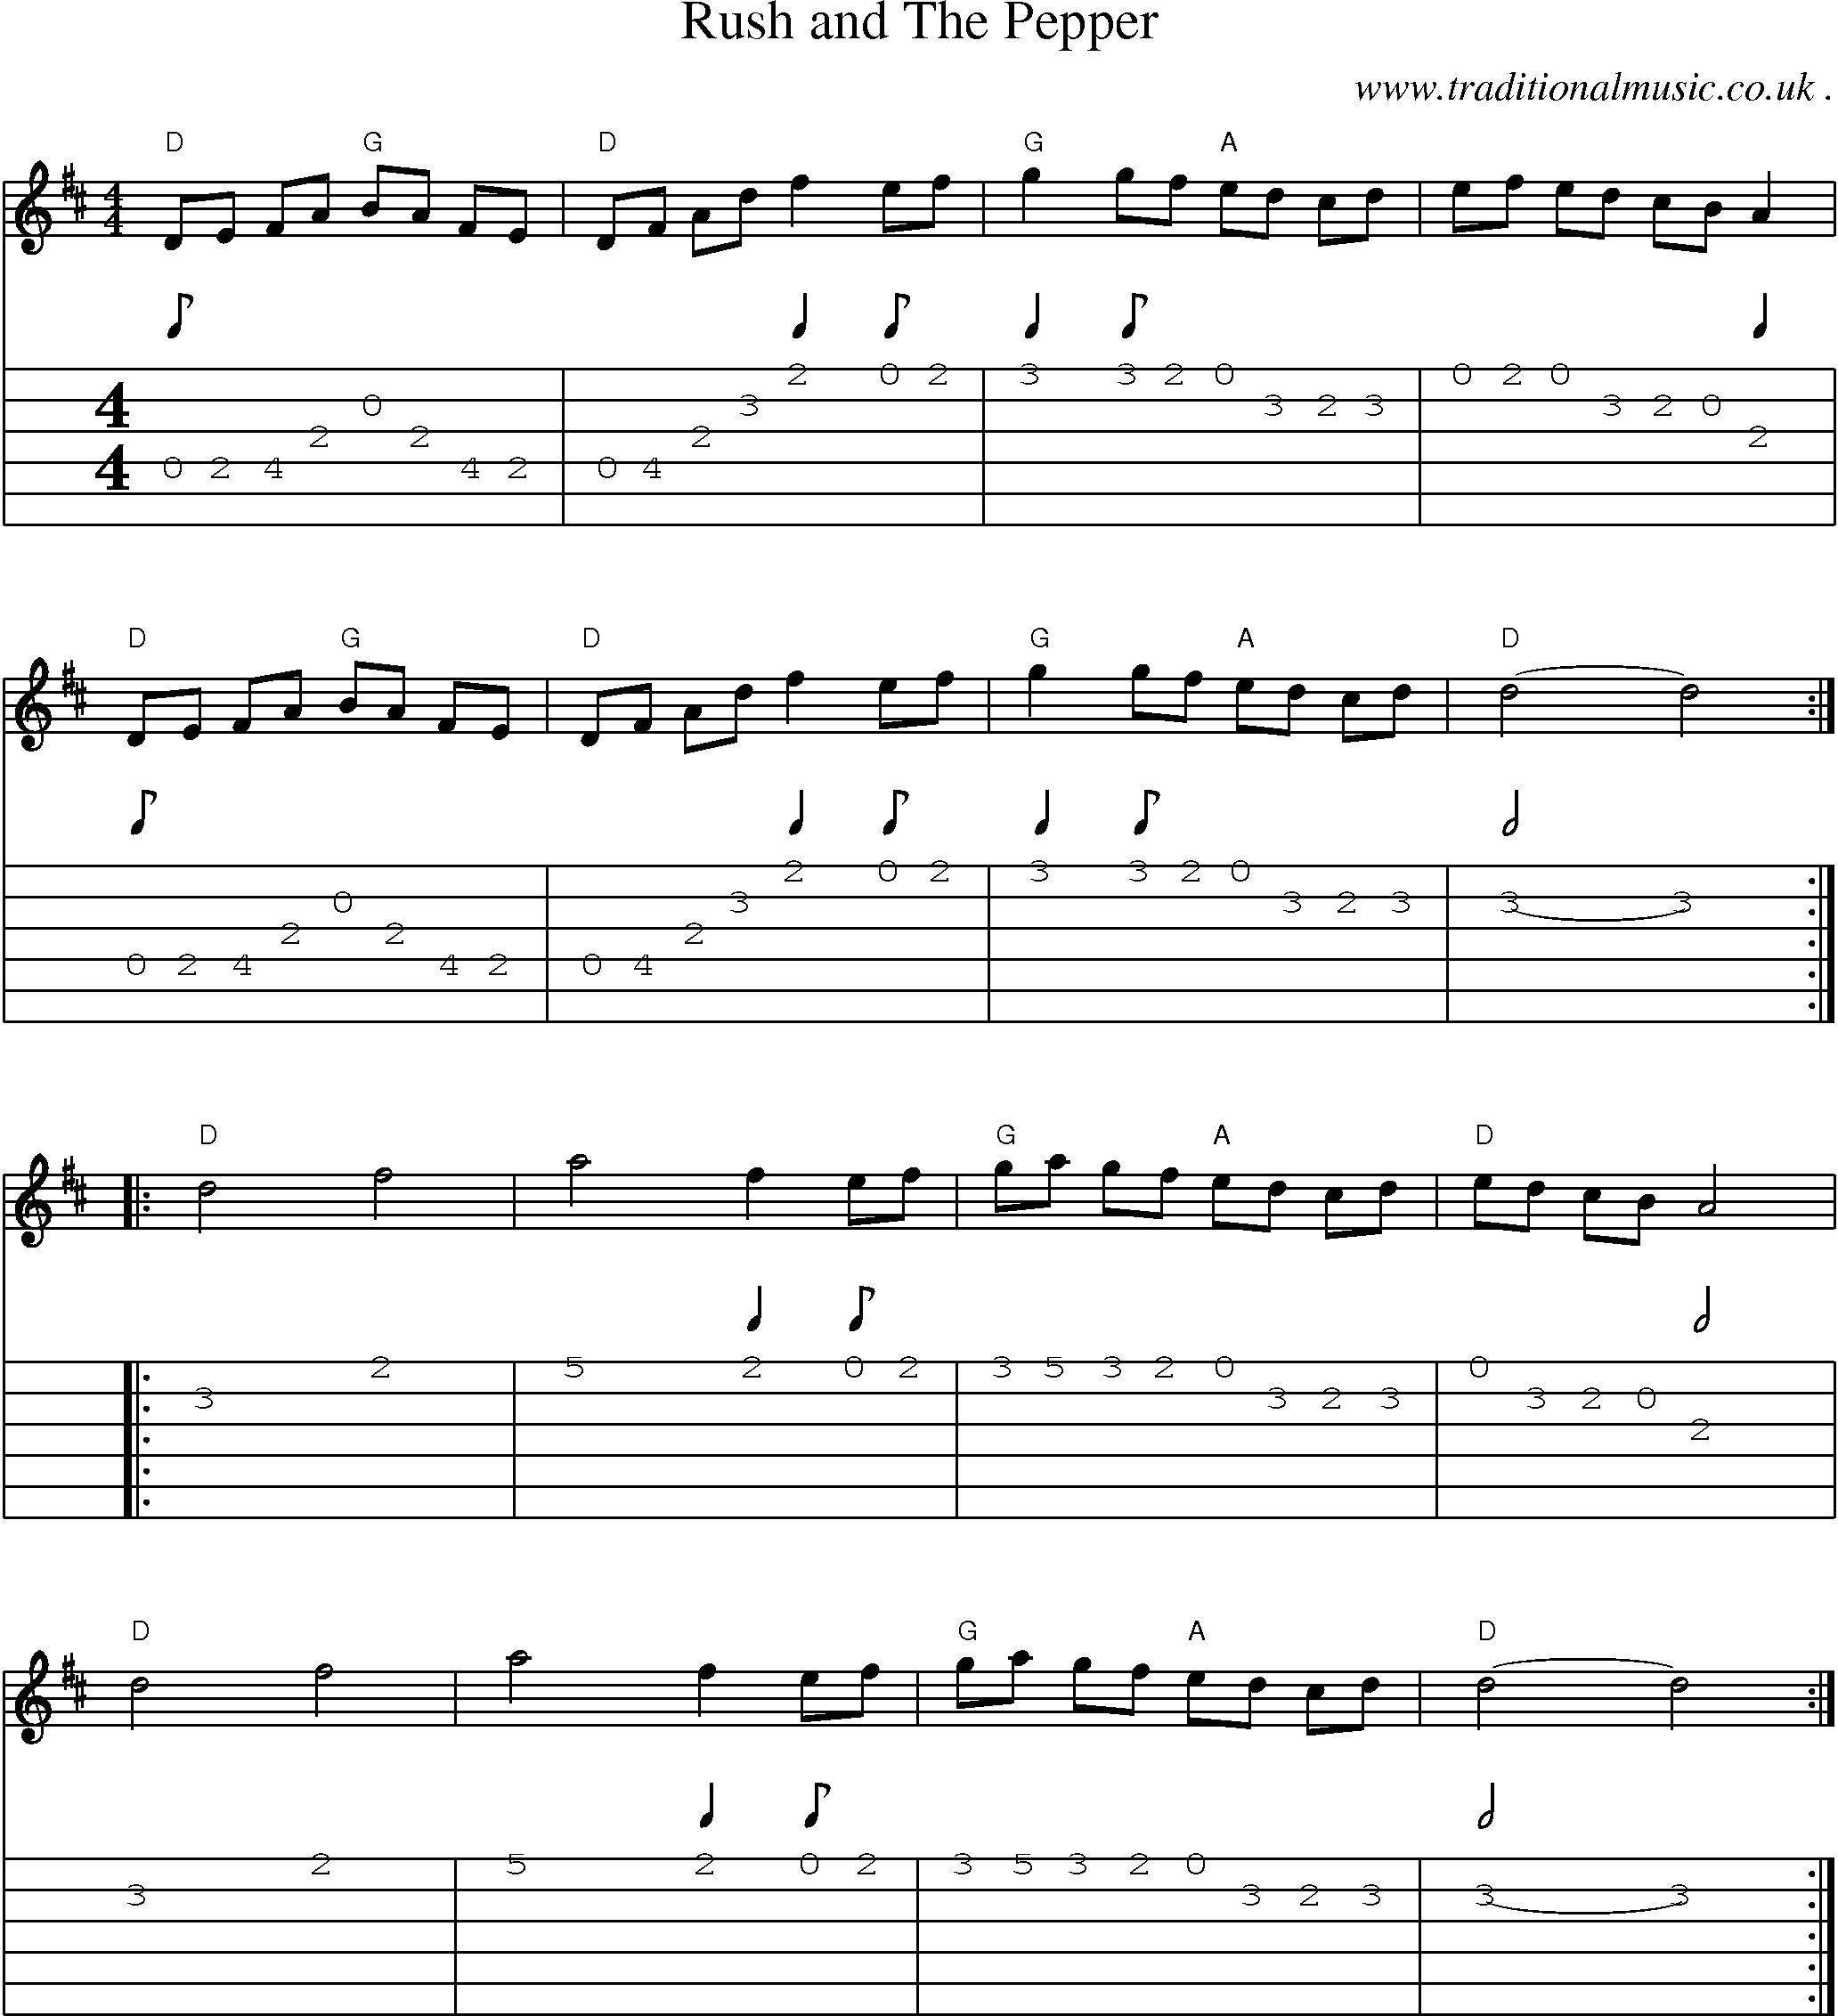 Music Score and Guitar Tabs for Rush And The Pepper